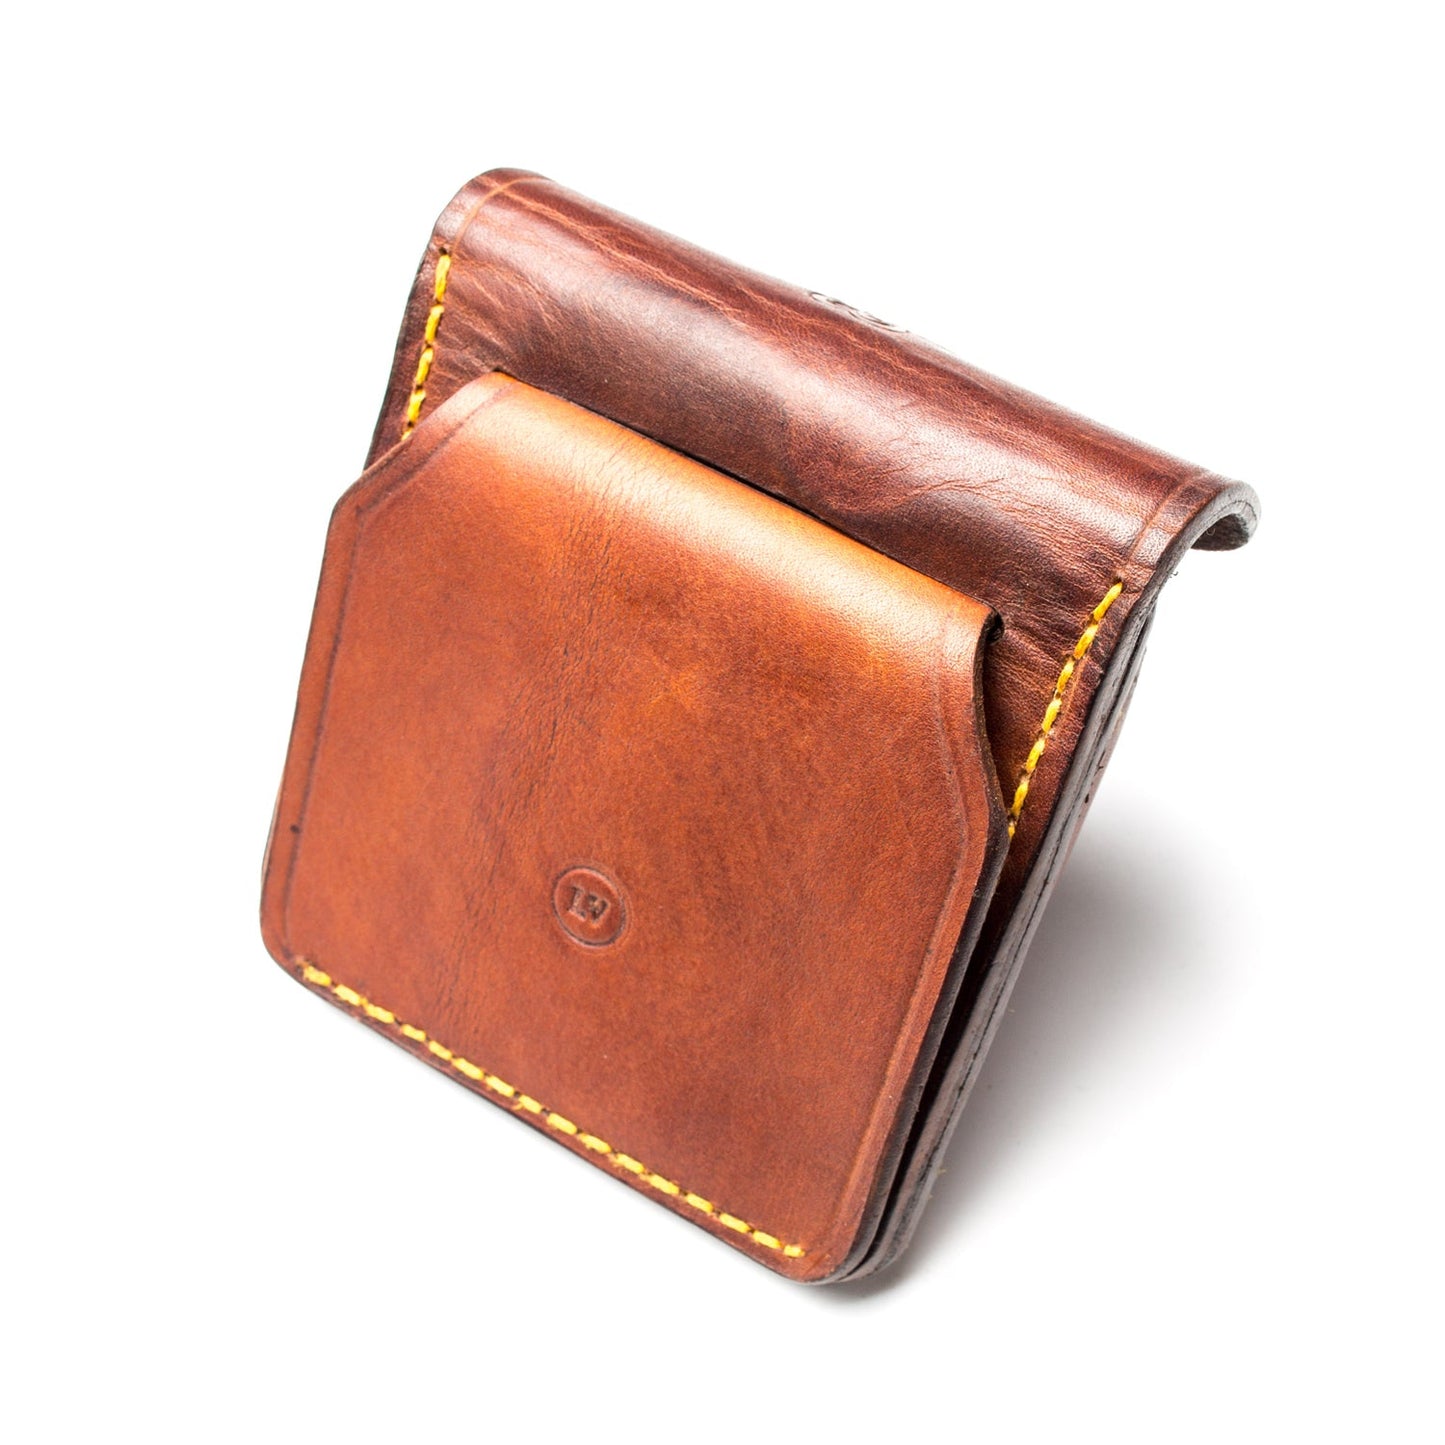 Rigby Leather Bullet Pouch - EUROPEAN